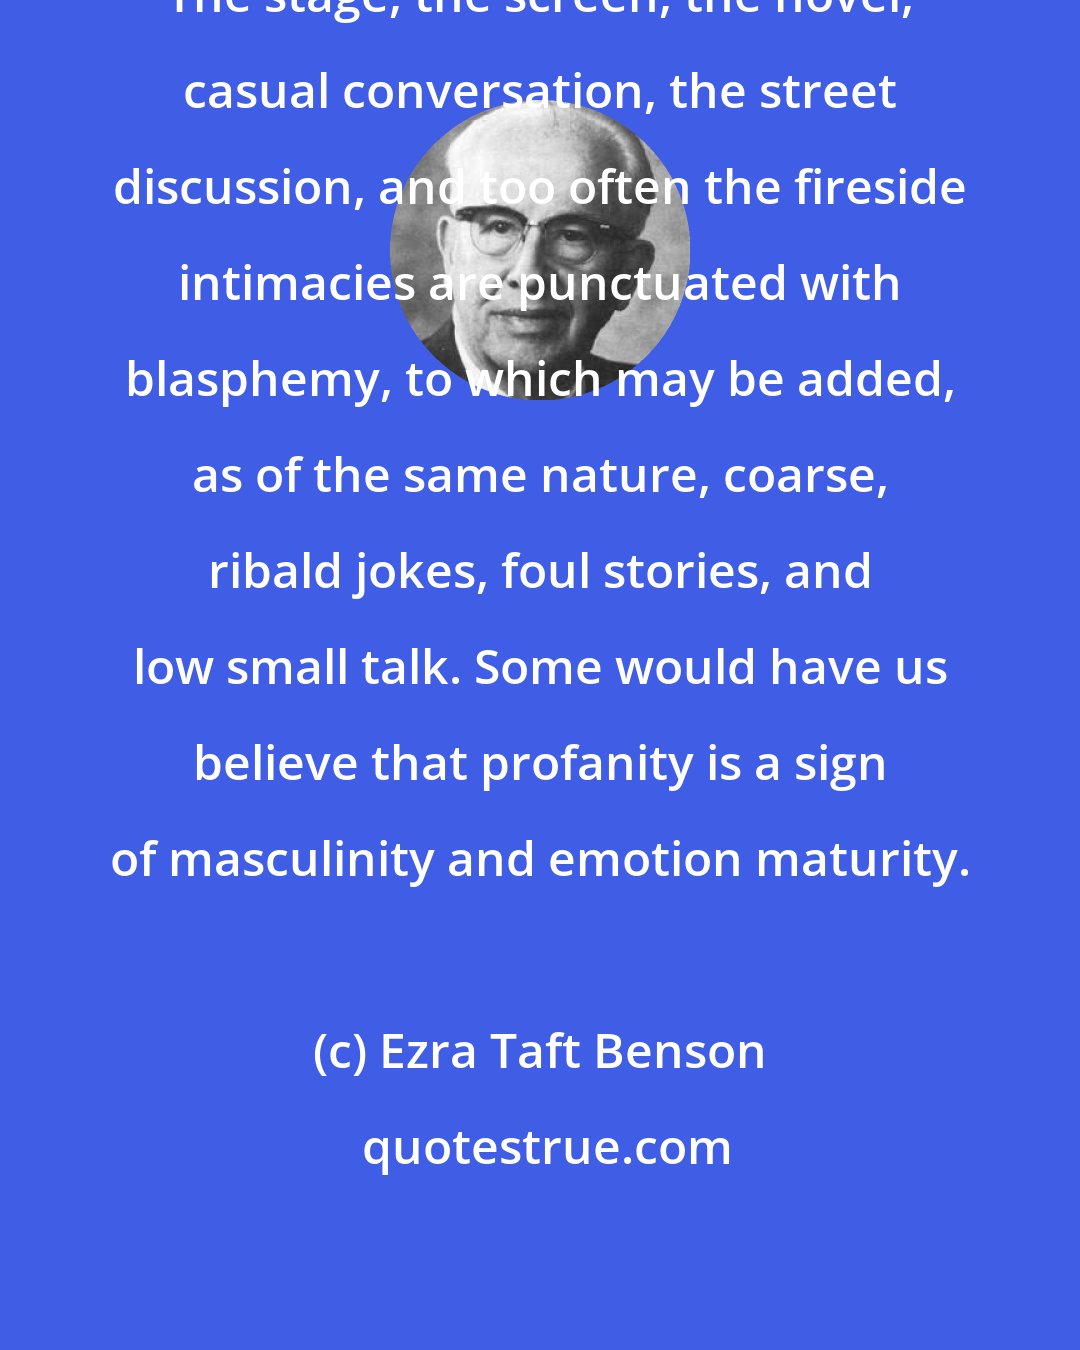 Ezra Taft Benson: The stage, the screen, the novel, casual conversation, the street discussion, and too often the fireside intimacies are punctuated with blasphemy, to which may be added, as of the same nature, coarse, ribald jokes, foul stories, and low small talk. Some would have us believe that profanity is a sign of masculinity and emotion maturity.